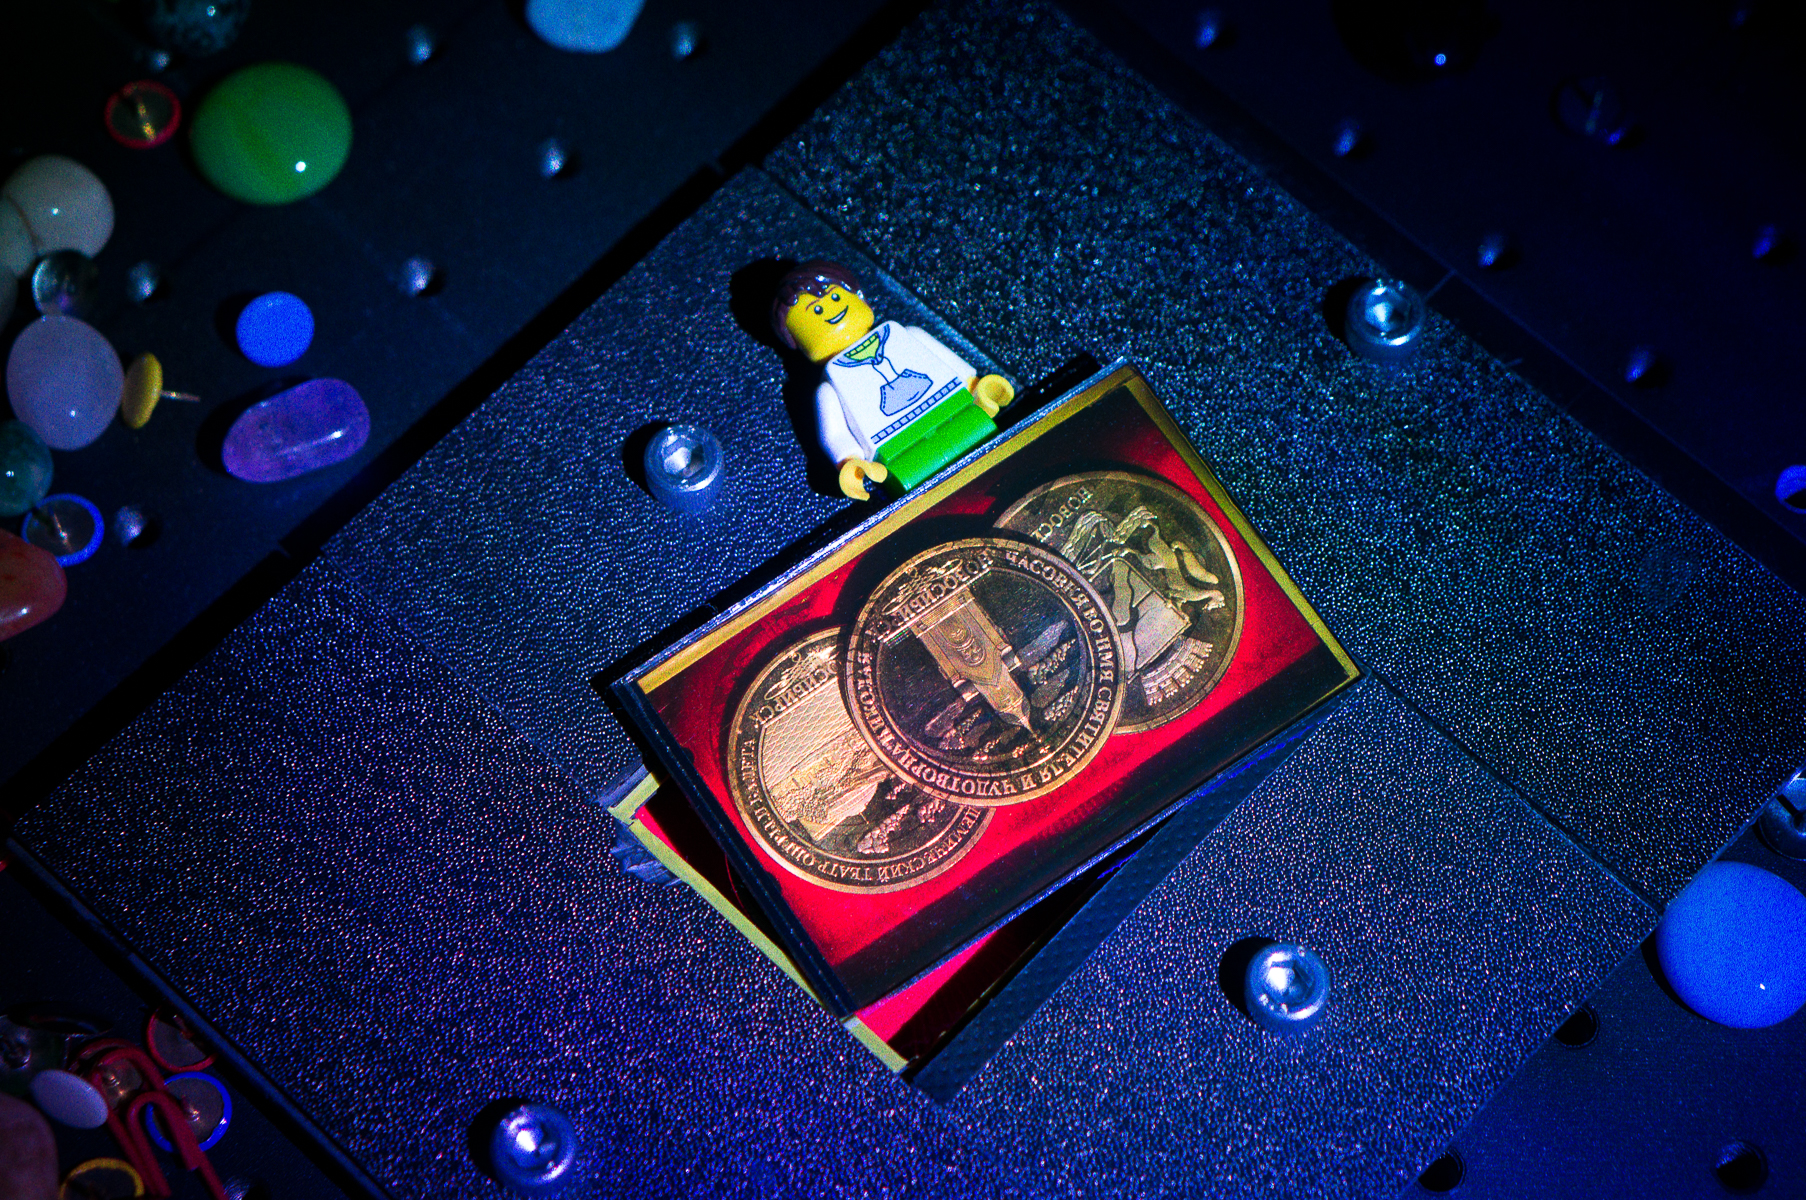 Hologram medals restored by RGB lasers